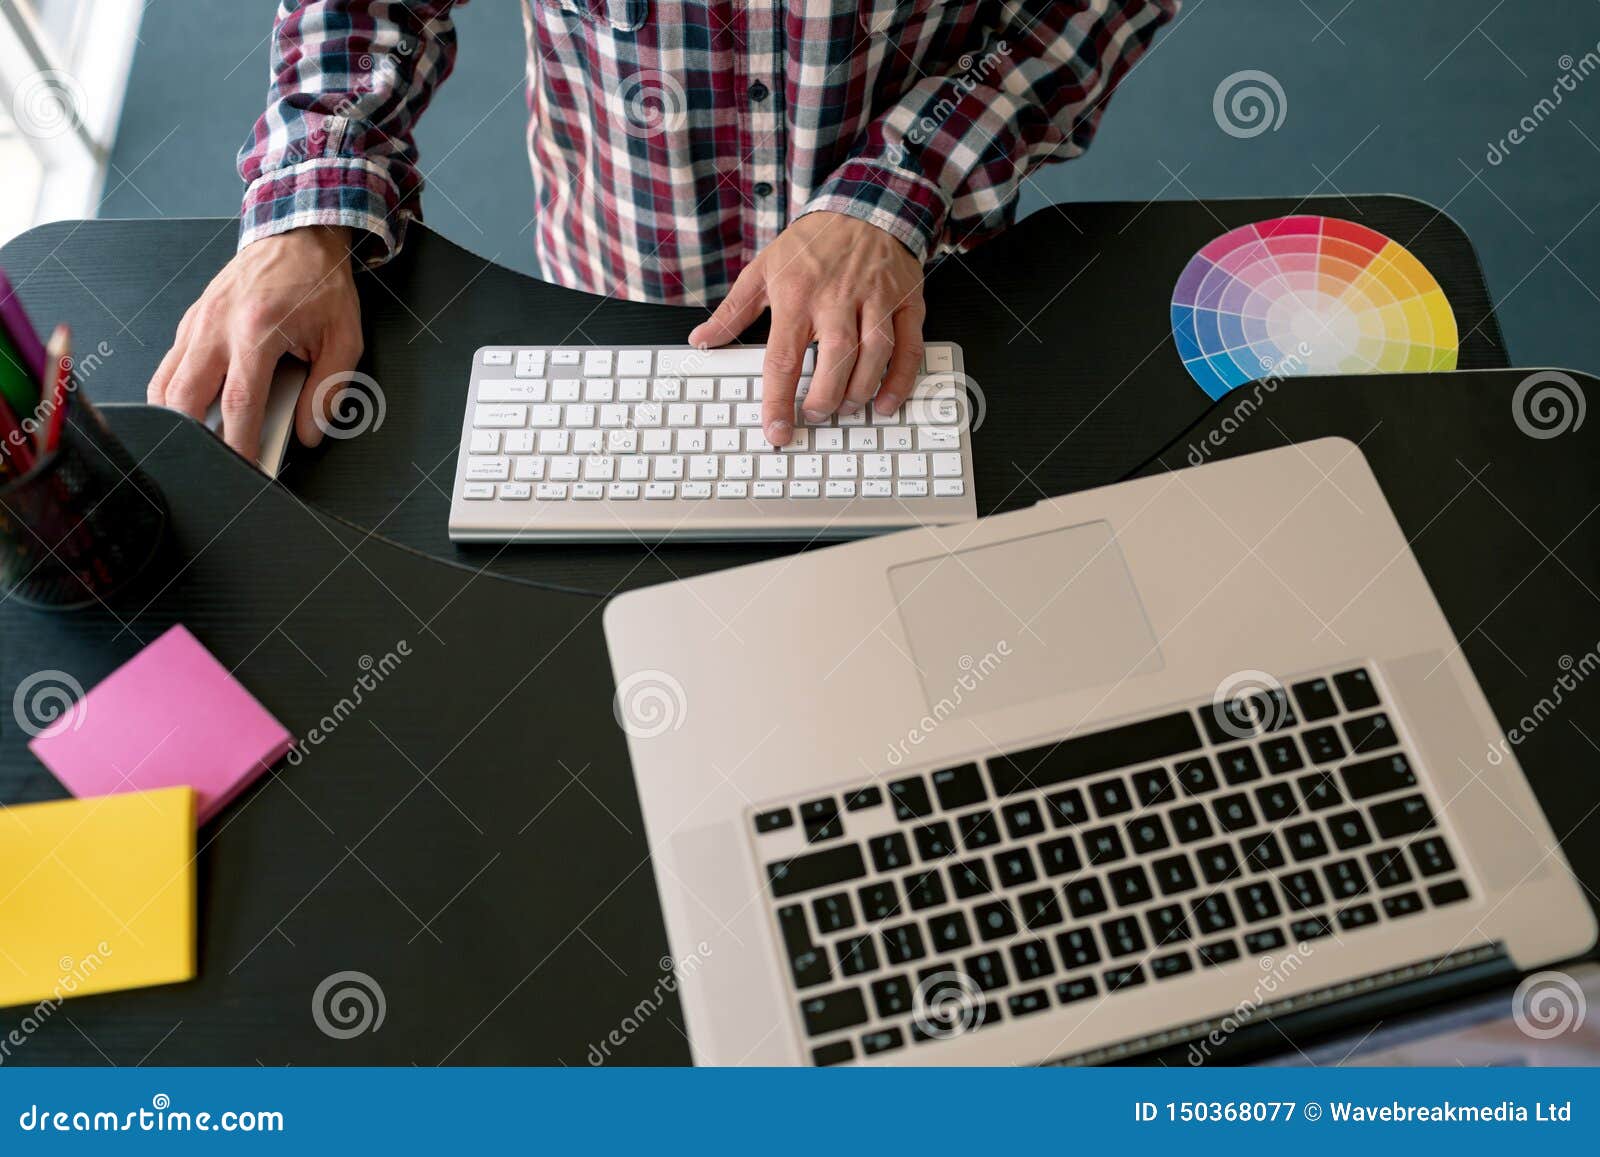 Male Graphic Designer Working On Laptop At Desk In Office Stock